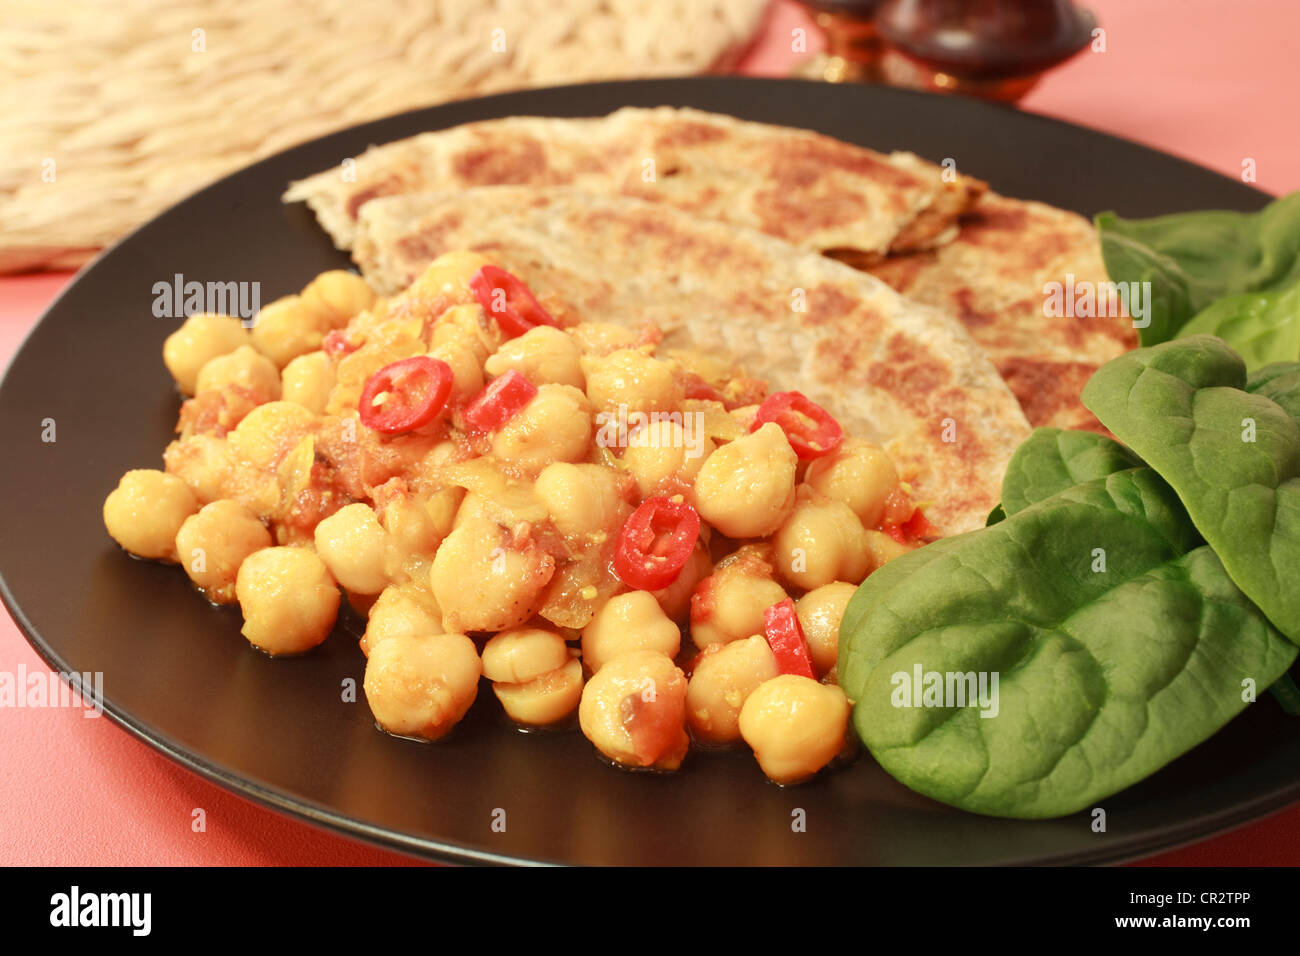 Popular Indian vegetarian snack food, channa masala or chickpea curry, on a plate with Indian roti. Stock Photo